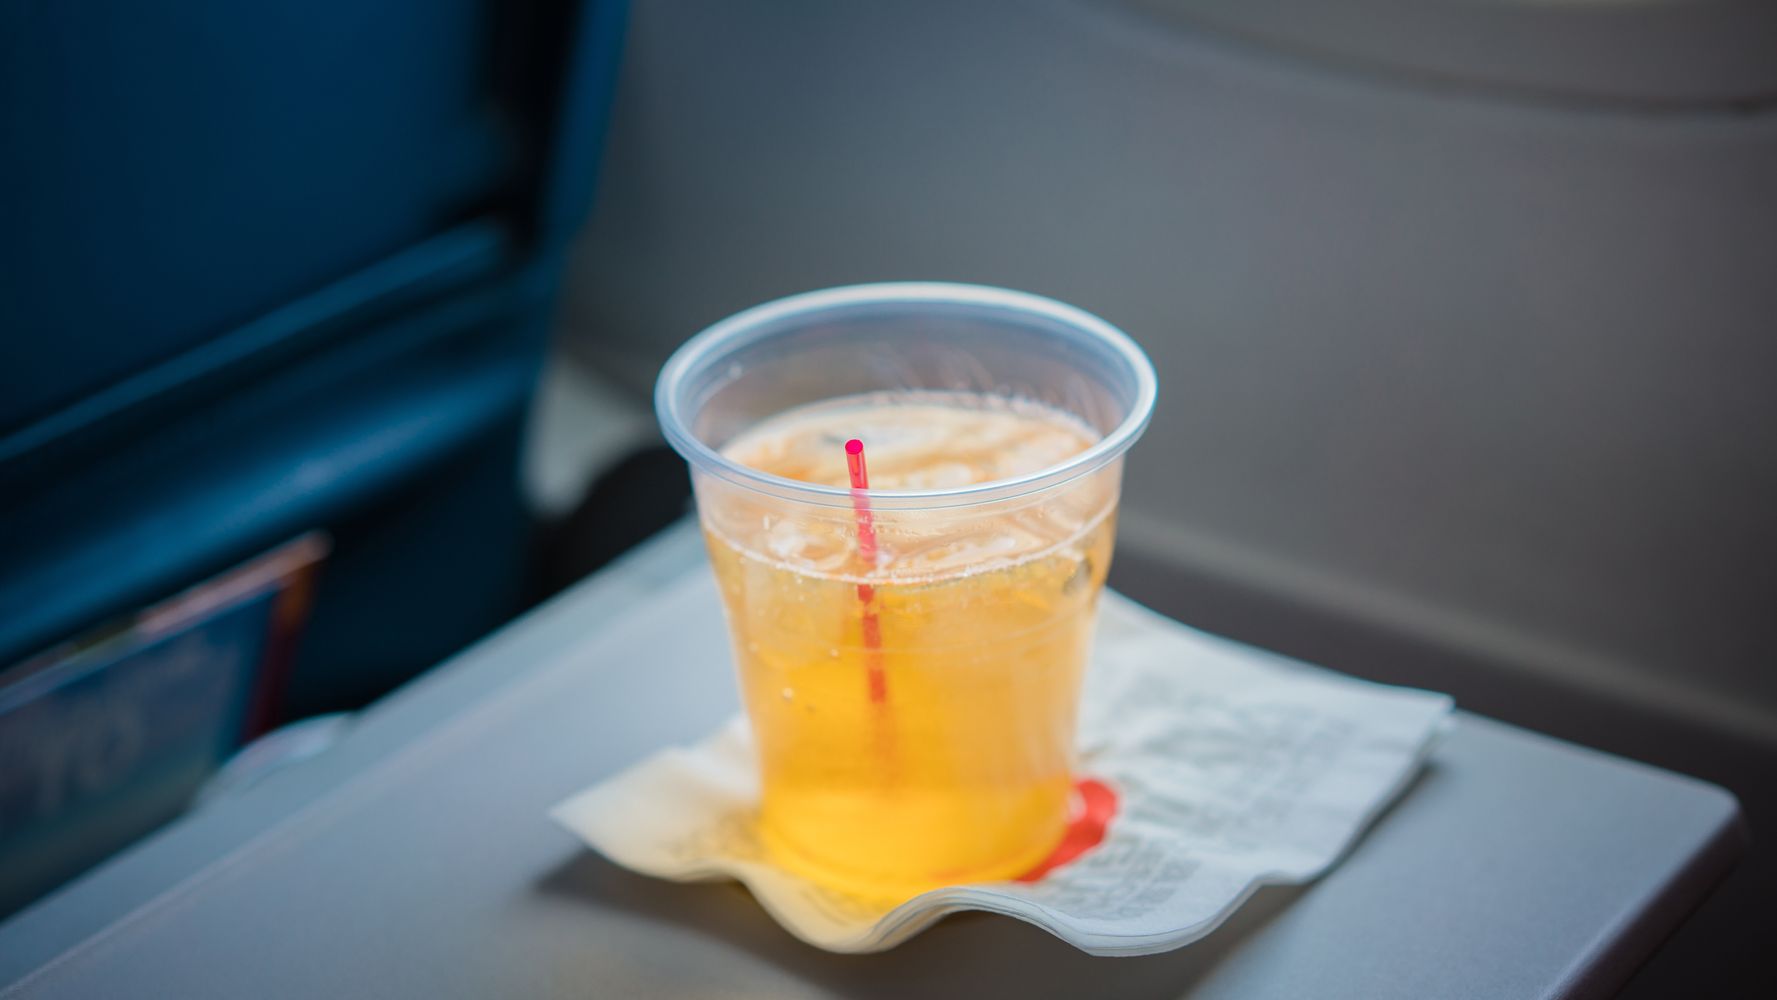 American, Southwest Airlines Extend Alcohol Suspensions After 'Disturbing' Incidents